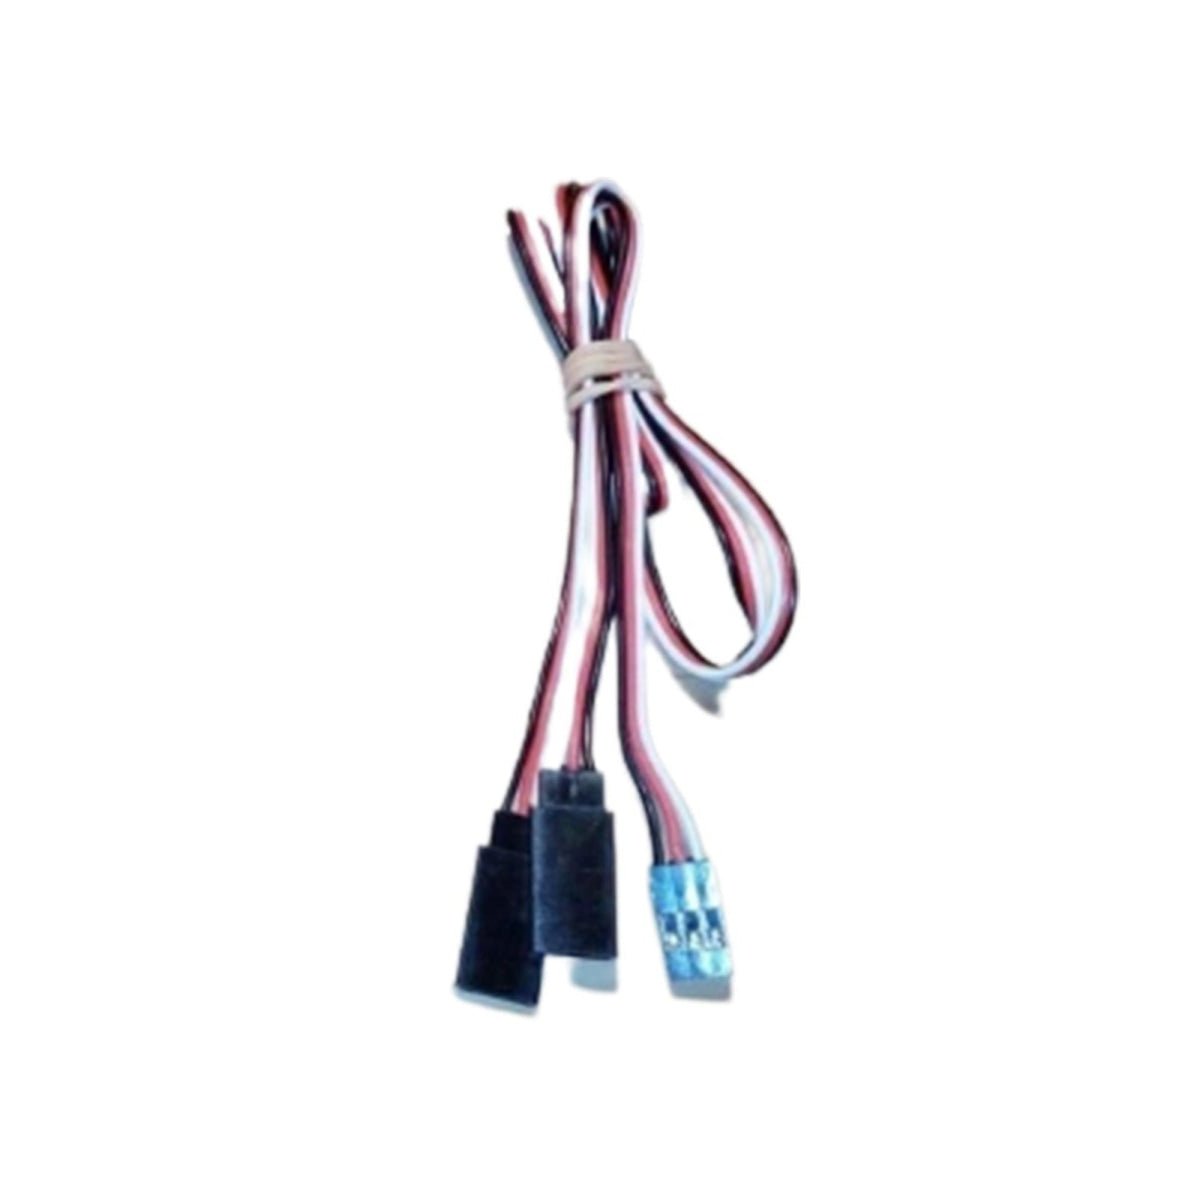 2/10/20/50pcs 100mm-500mm Y Splitter Servo Extension Cable RC Male Female Double - 2pcs 500mm - - Asia Sell